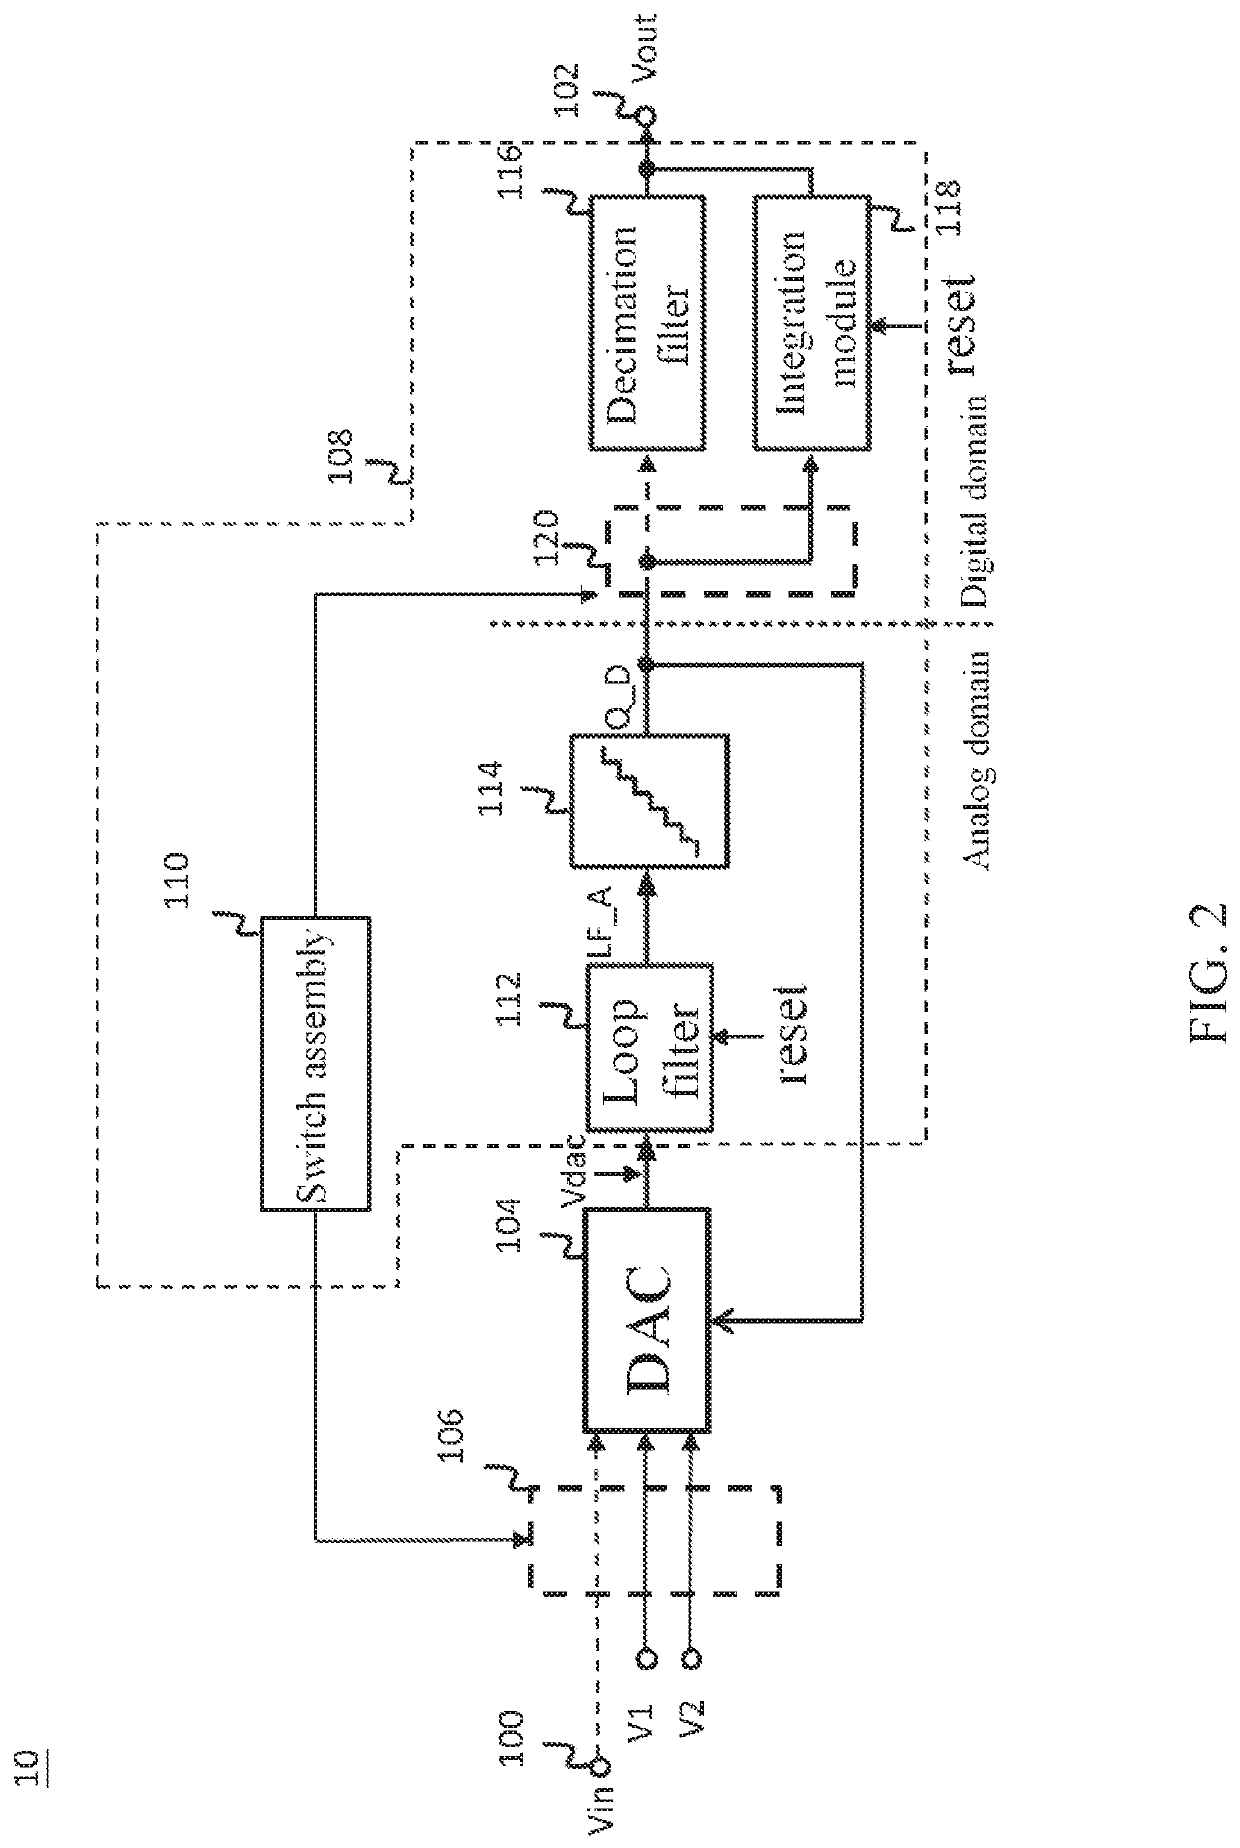 Analog-to-digital converter and associated chip